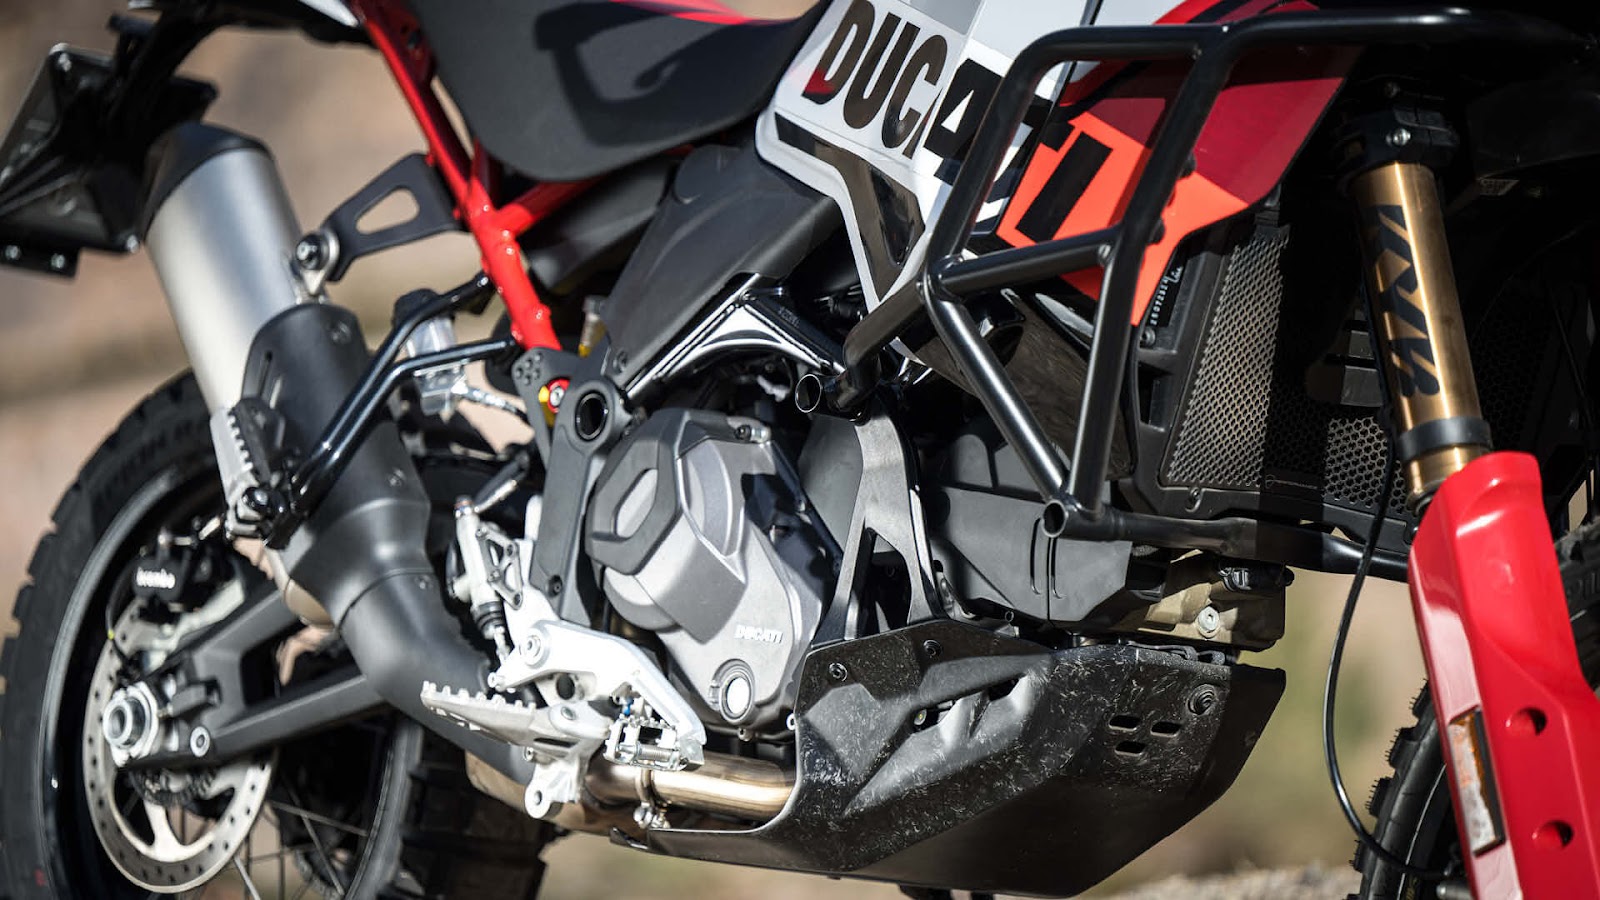 Carbon skid plate, or we wouldn't be talking about a Ducati.